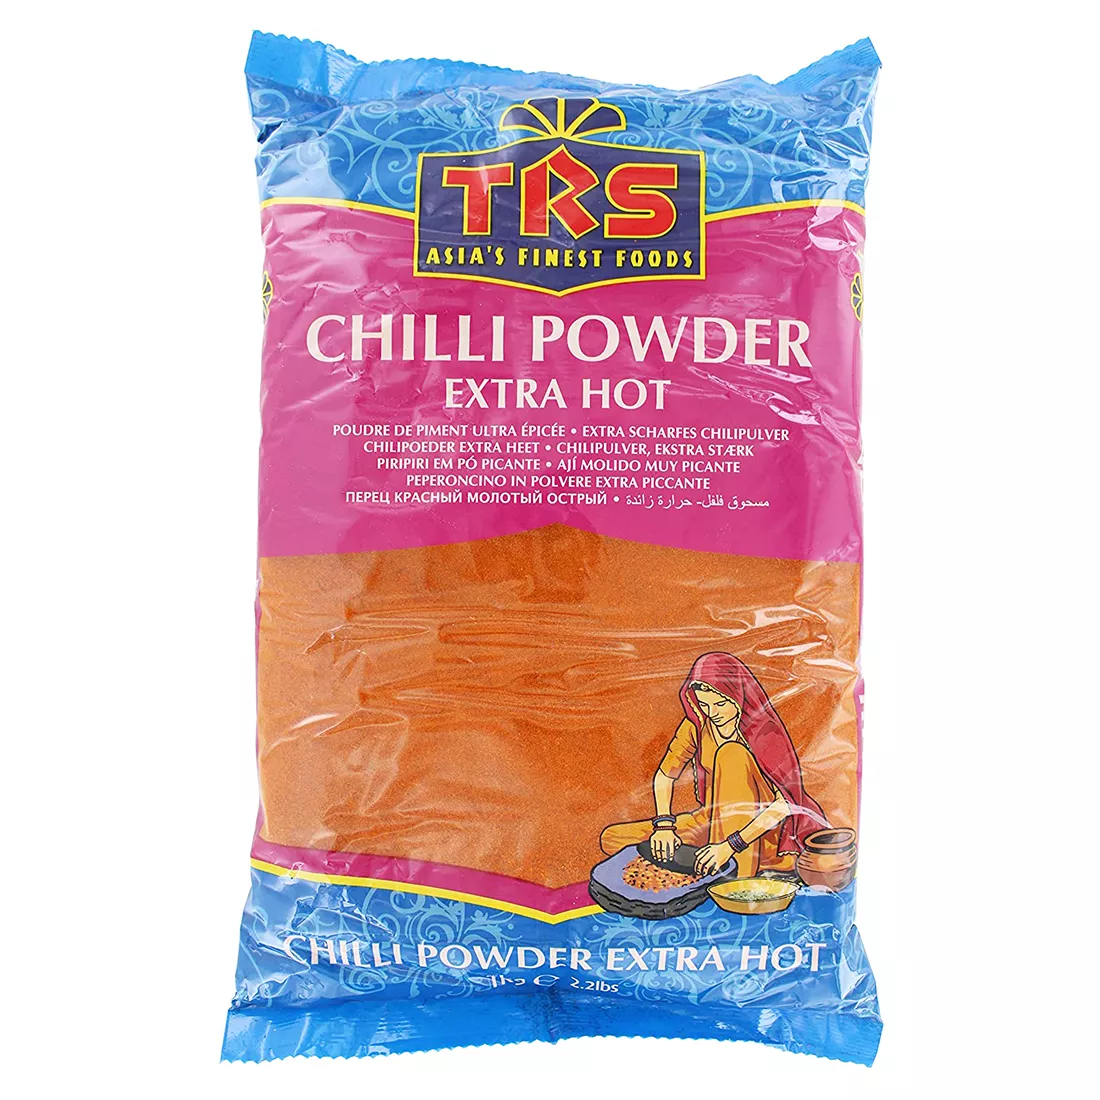 Pudra chilli extra hot TRS 100g, [],asianfood.ro